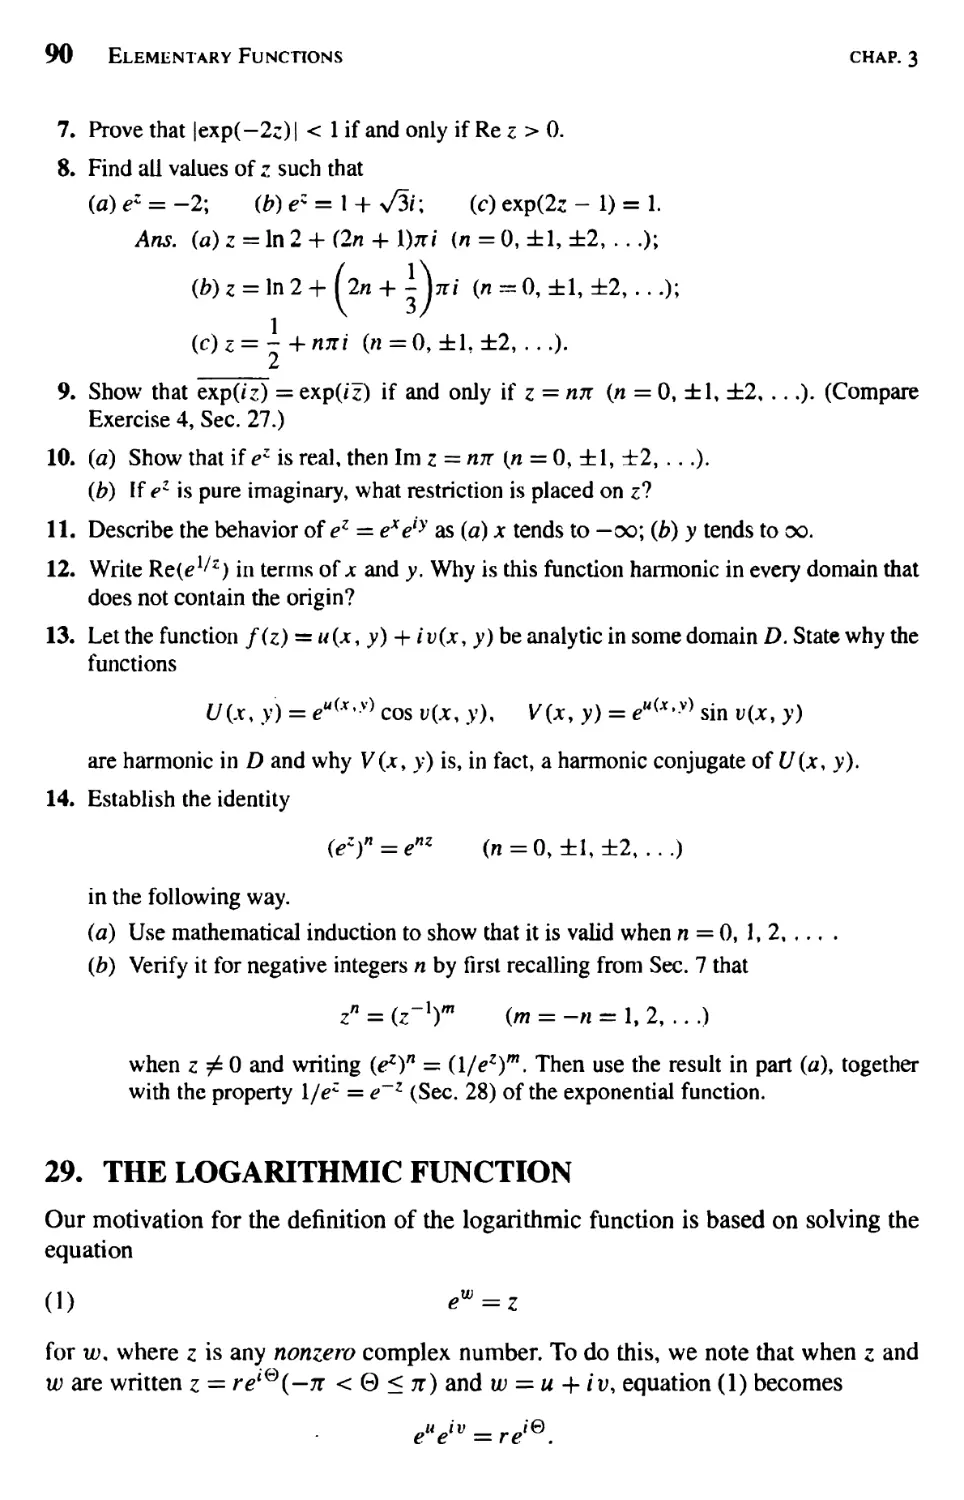 The Logarithmic Function